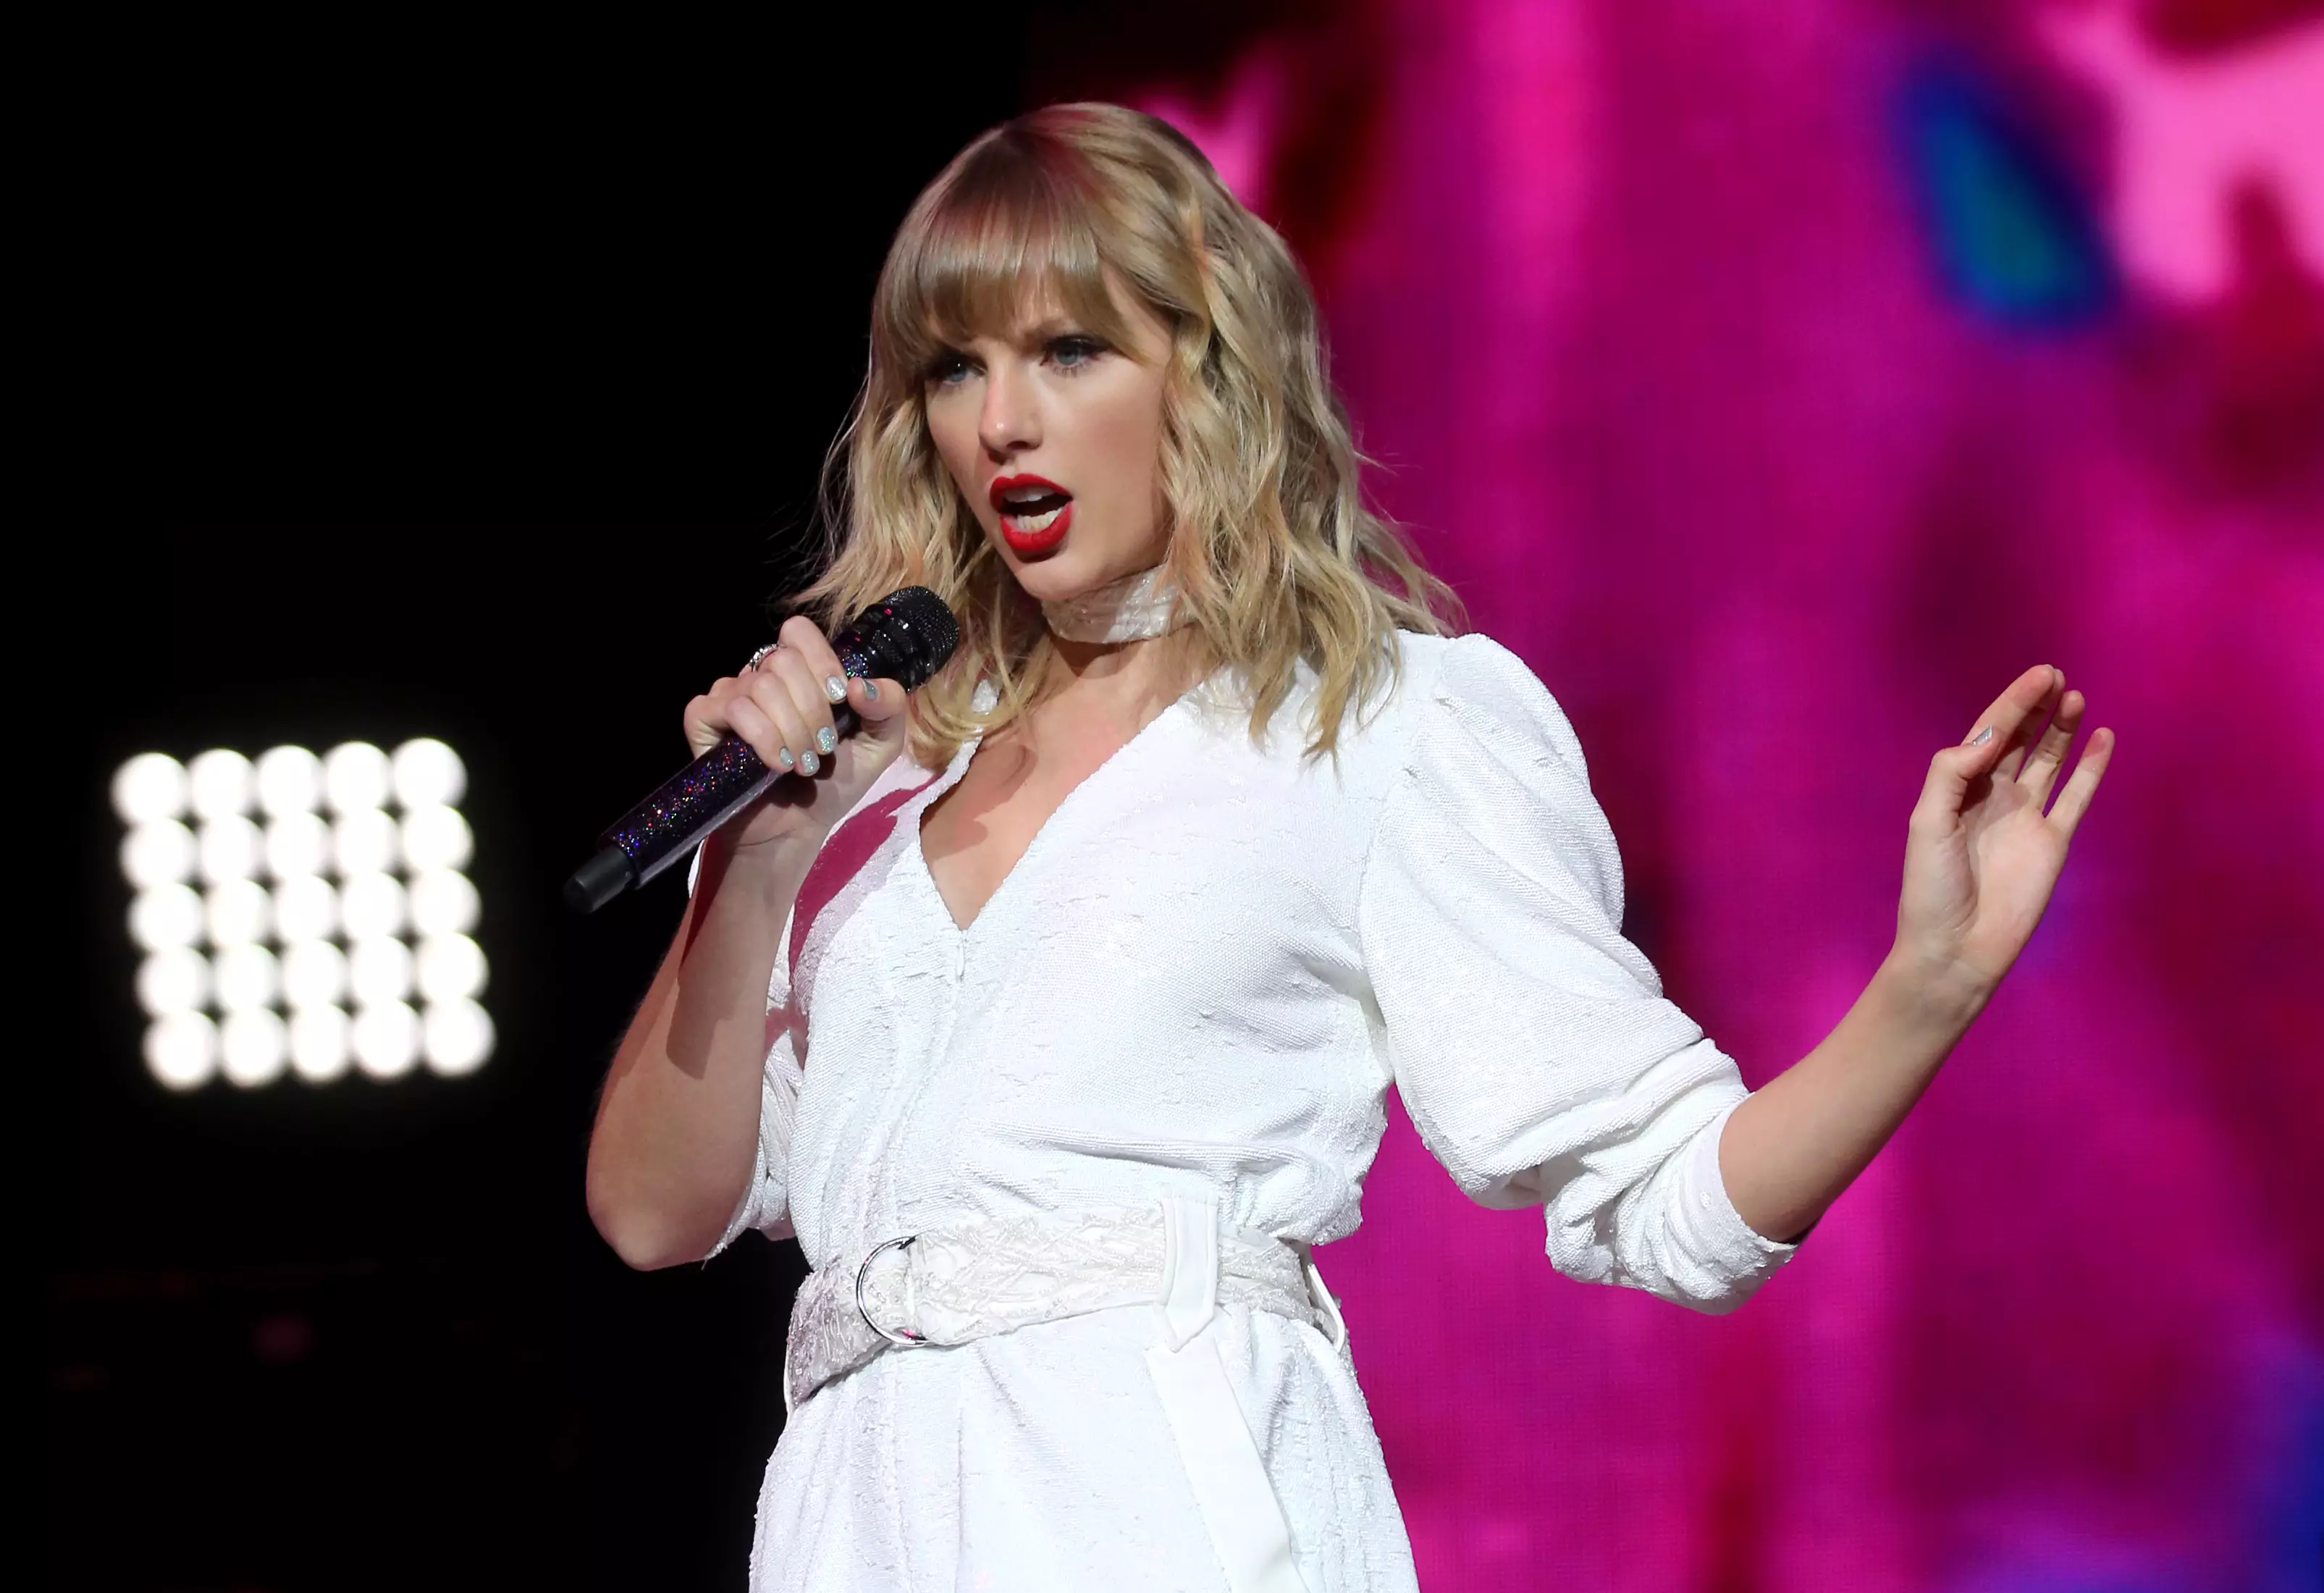 The singer announced the upcoming doc last November, during her ongoing feud with involves record exec Scooter Braun and co-founder of Taylor's former label, Scott Borchetta (